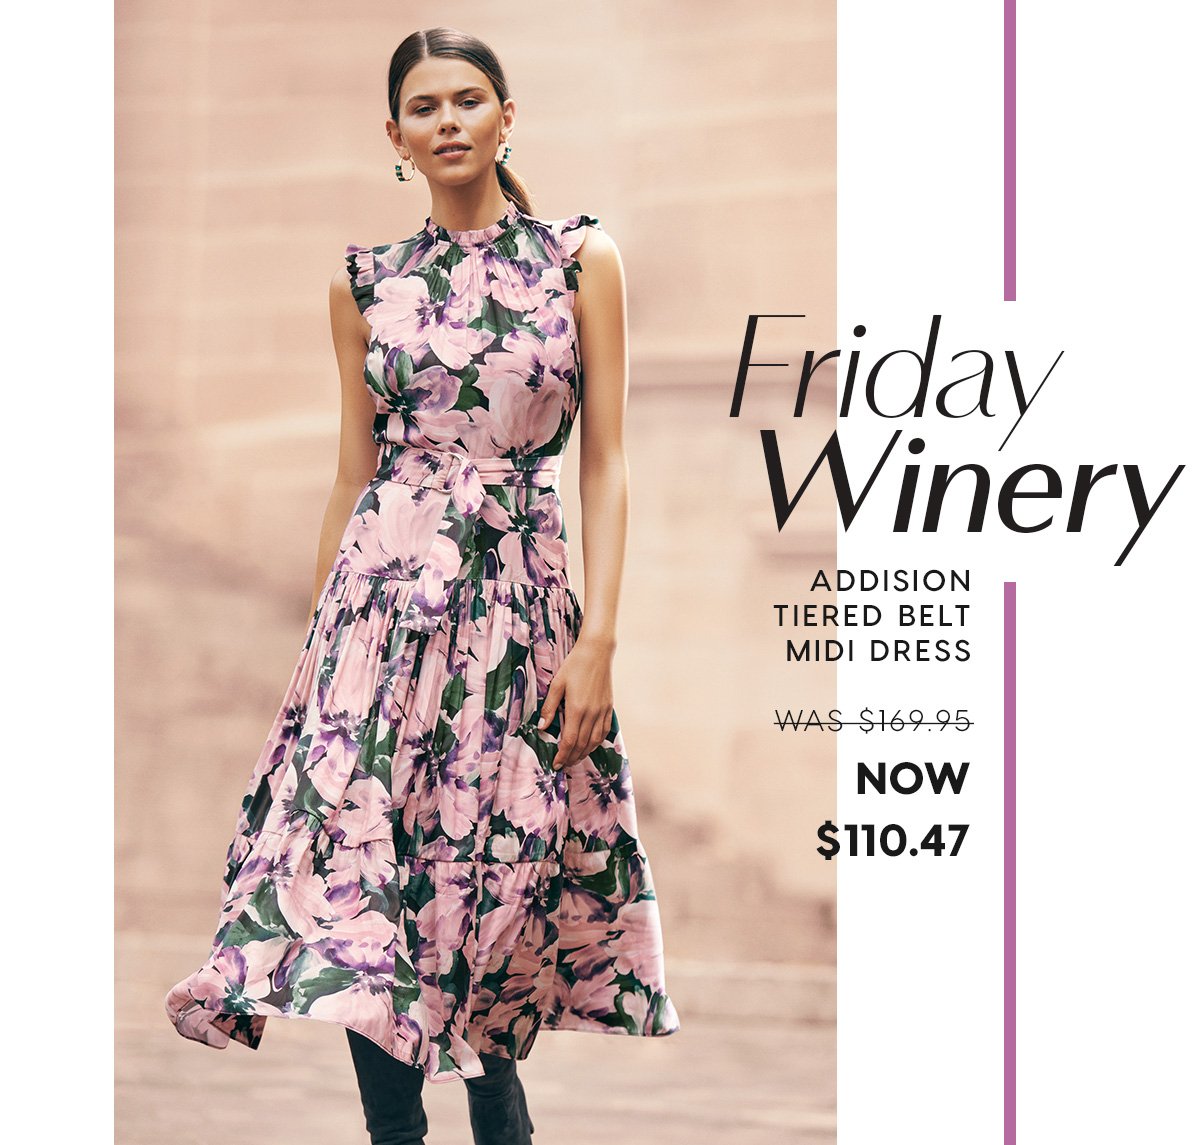 Friday Winery. Addision Tiered Belt Midi Dress  WAS $169.95 NOW $110.47